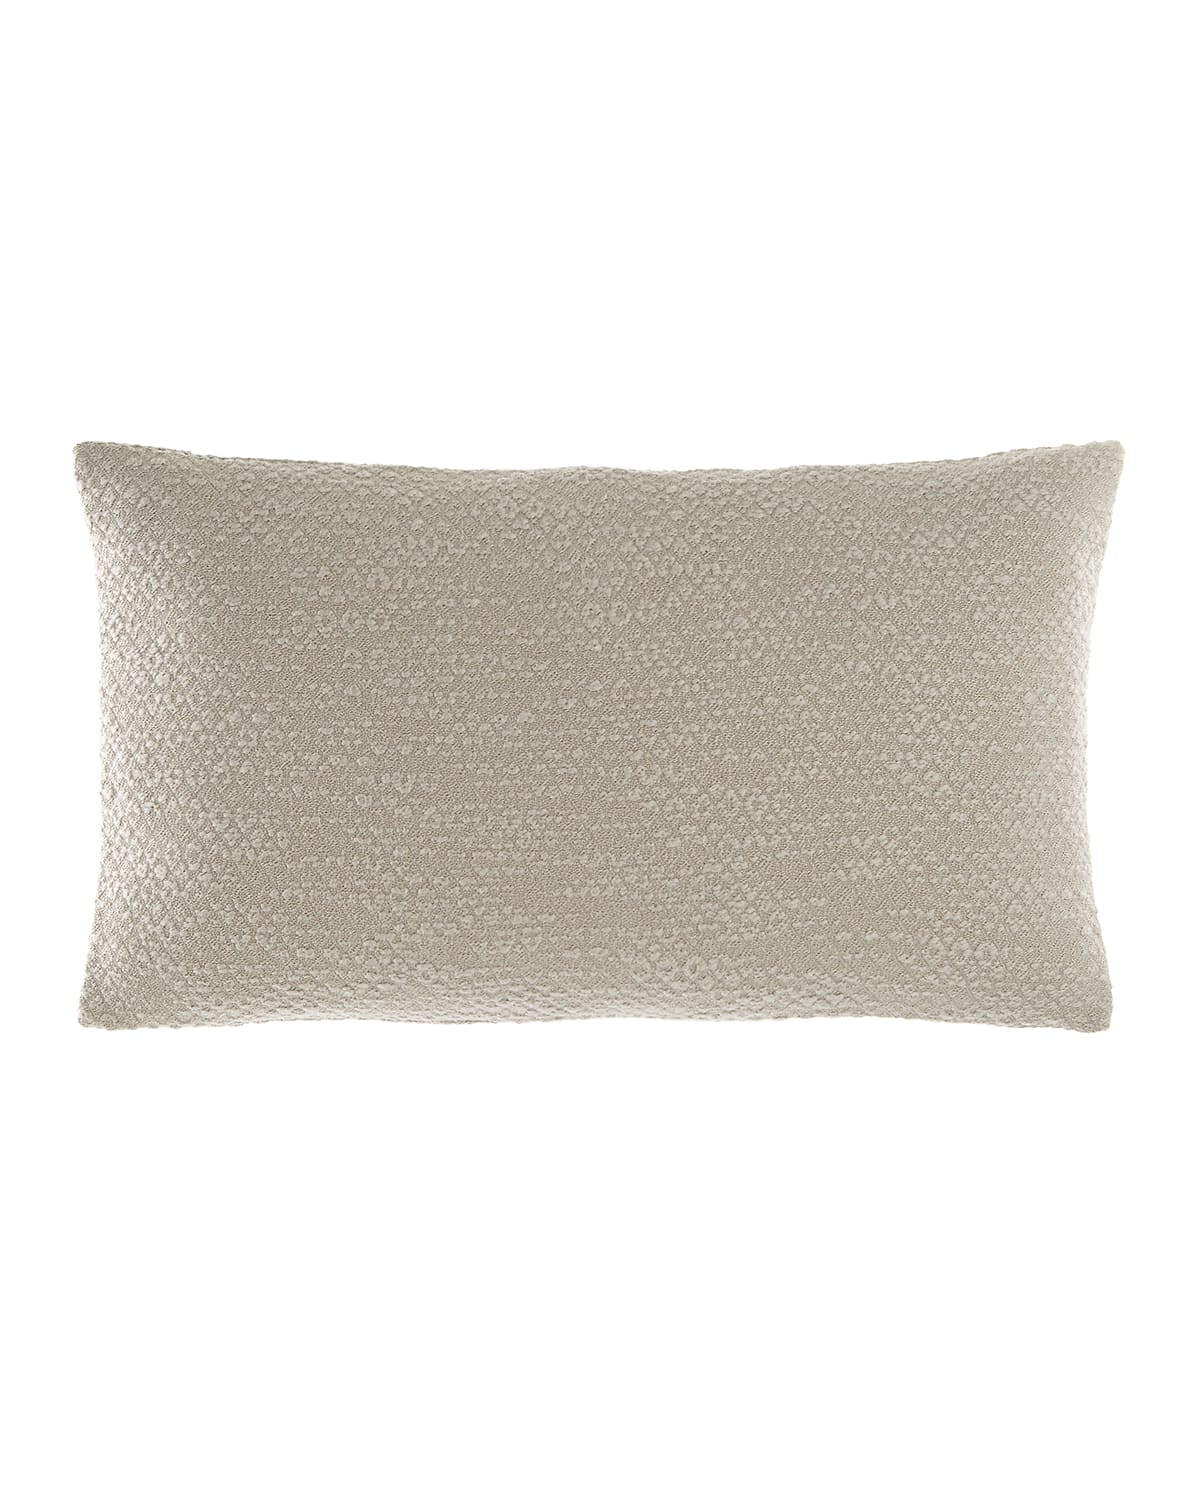 Image Amity Home Orlana Oblong Decorative Pillow